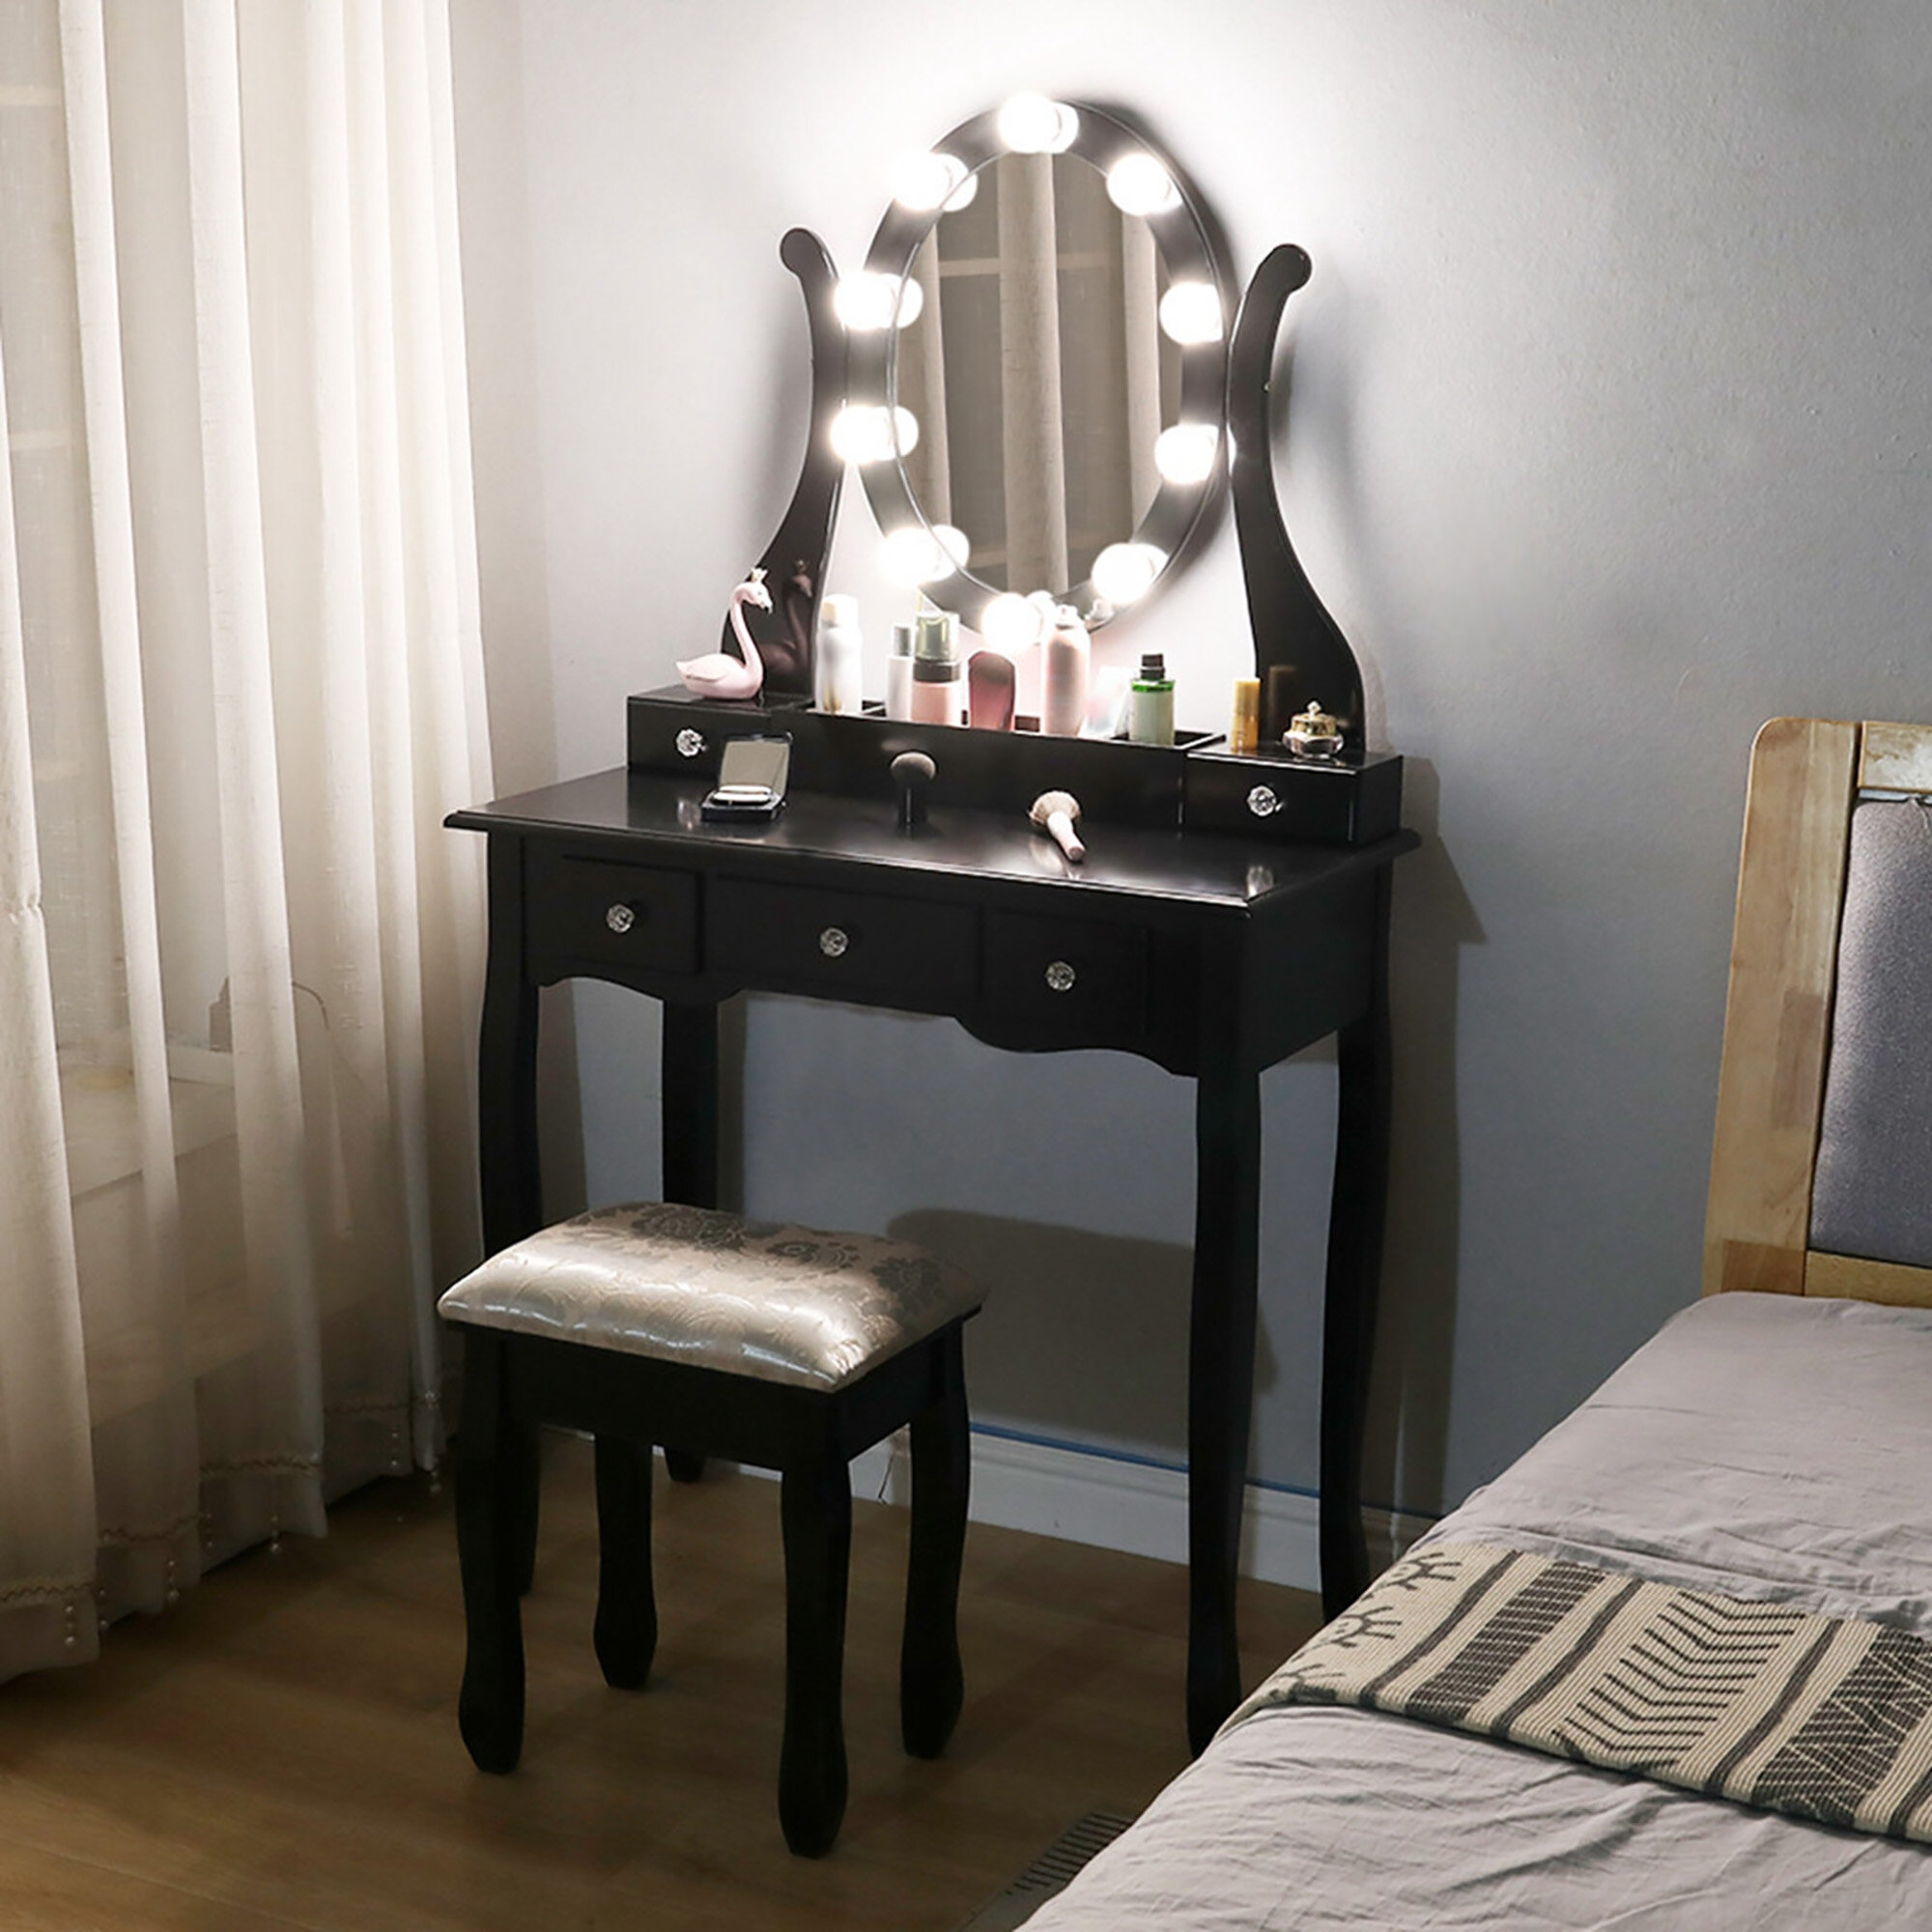 LED Lighted Vanity Table Set Makeup Dressing Table with Mirror & Stool Black